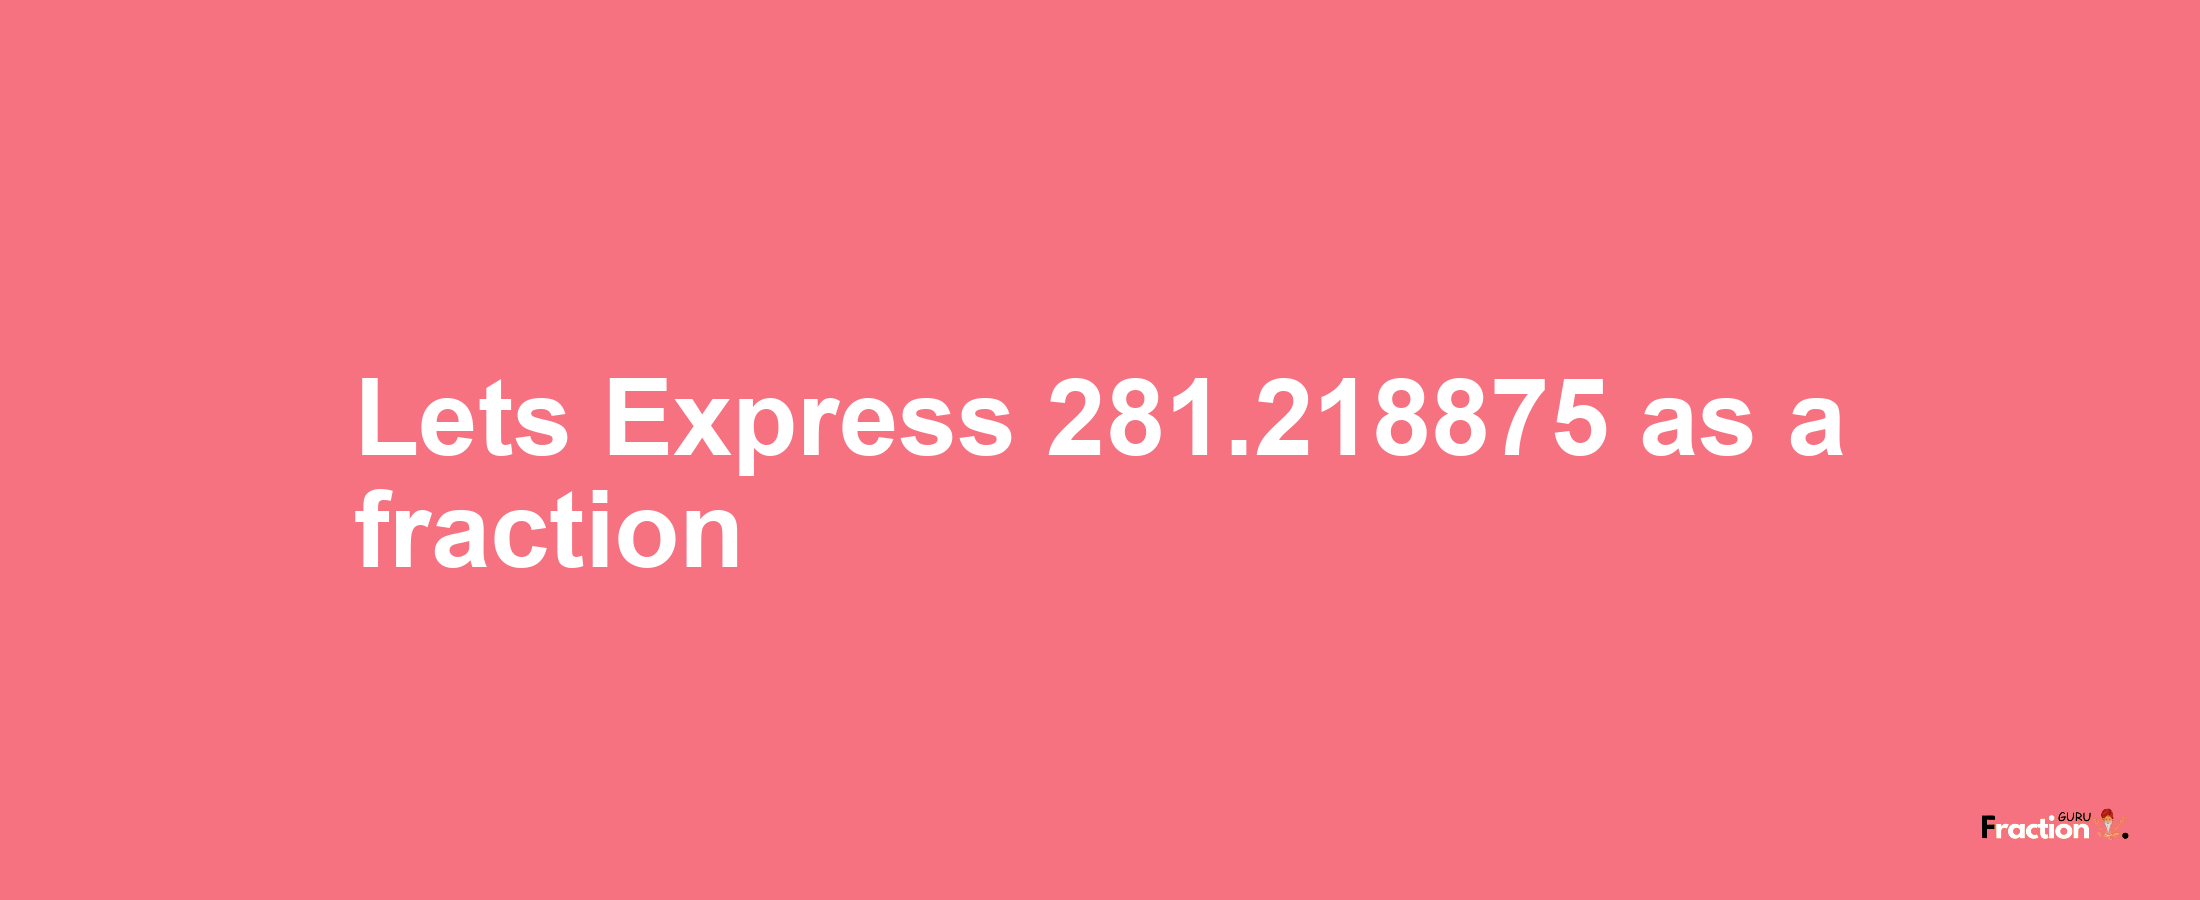 Lets Express 281.218875 as afraction